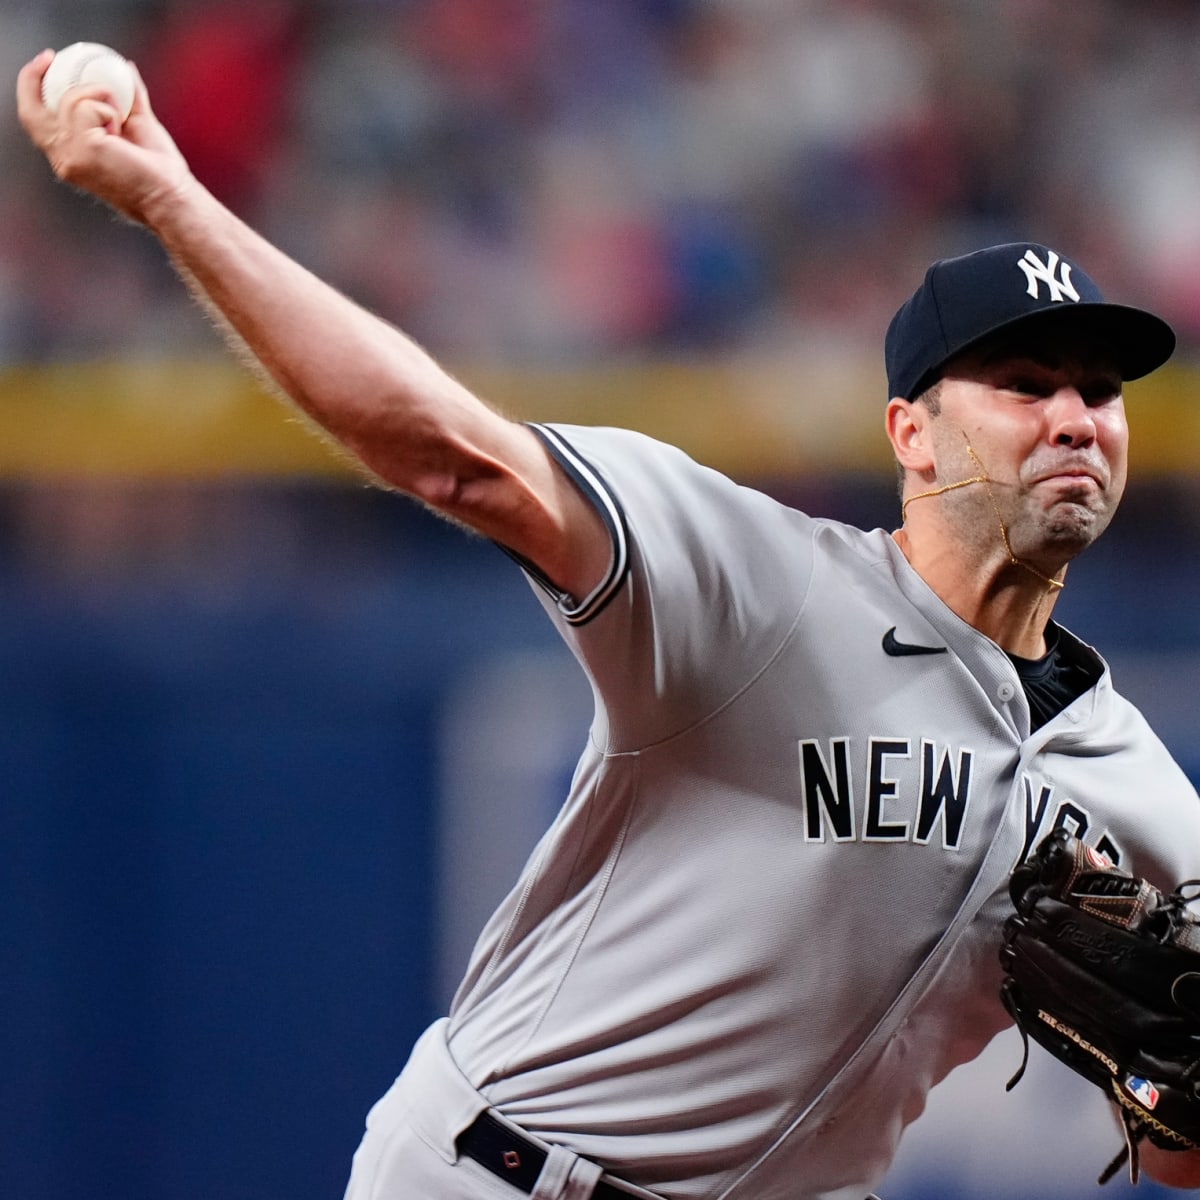 Yankees reliever Trivino warms up in wrong jersey, changes – KLBK